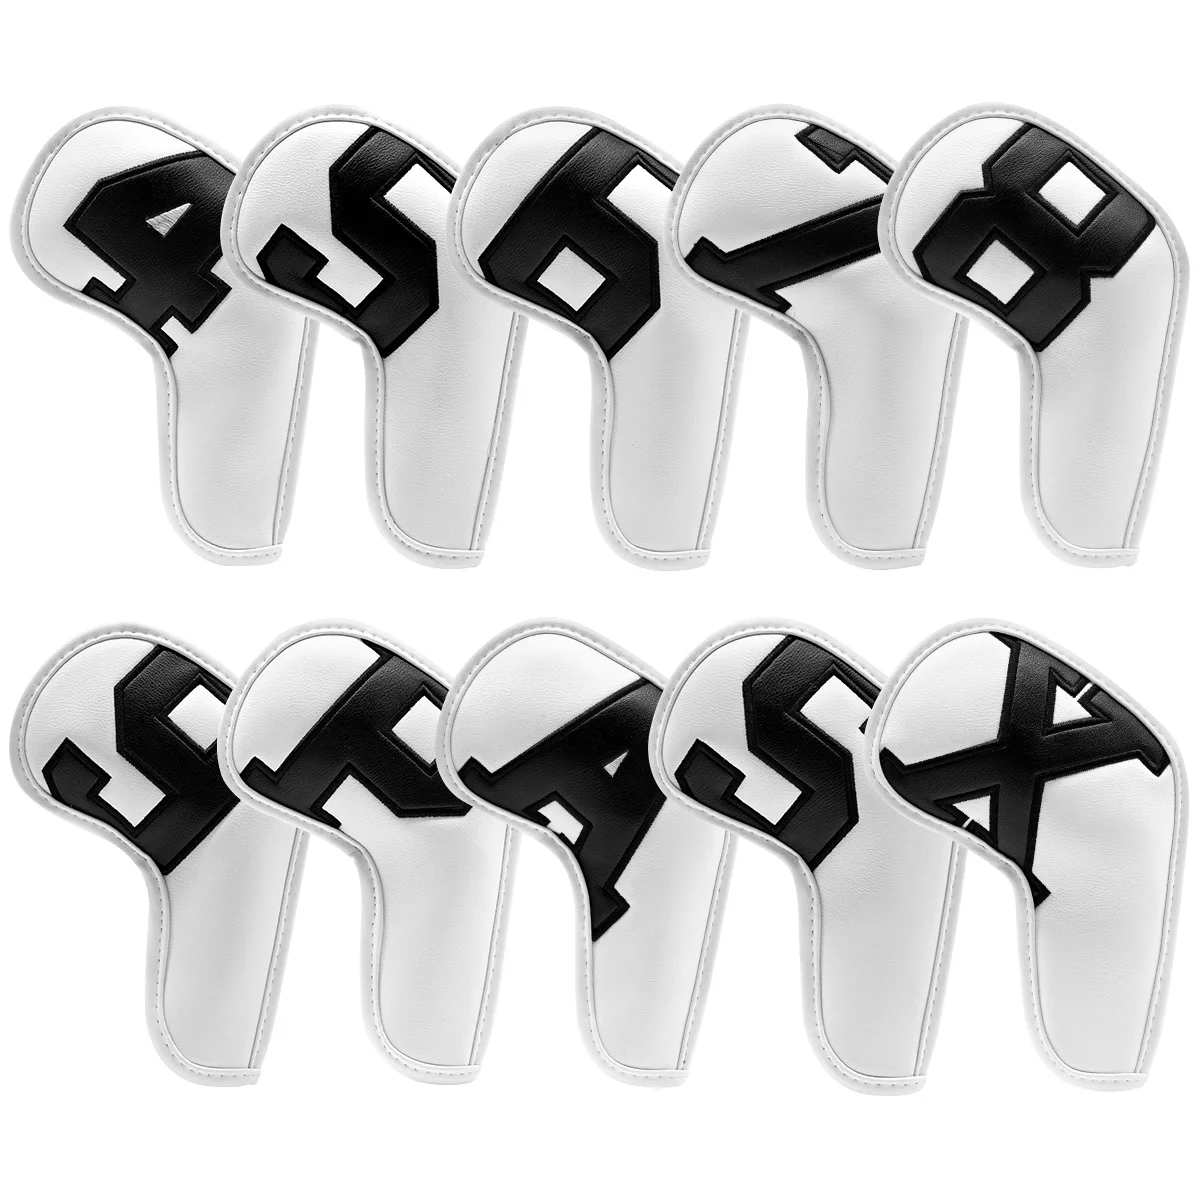 10 Pcs/set Golf Iron Club Cover P A S X 4 5 6 7 8 9 Color Digital Gradient Golf Headcover Protective Protector Black White Suit